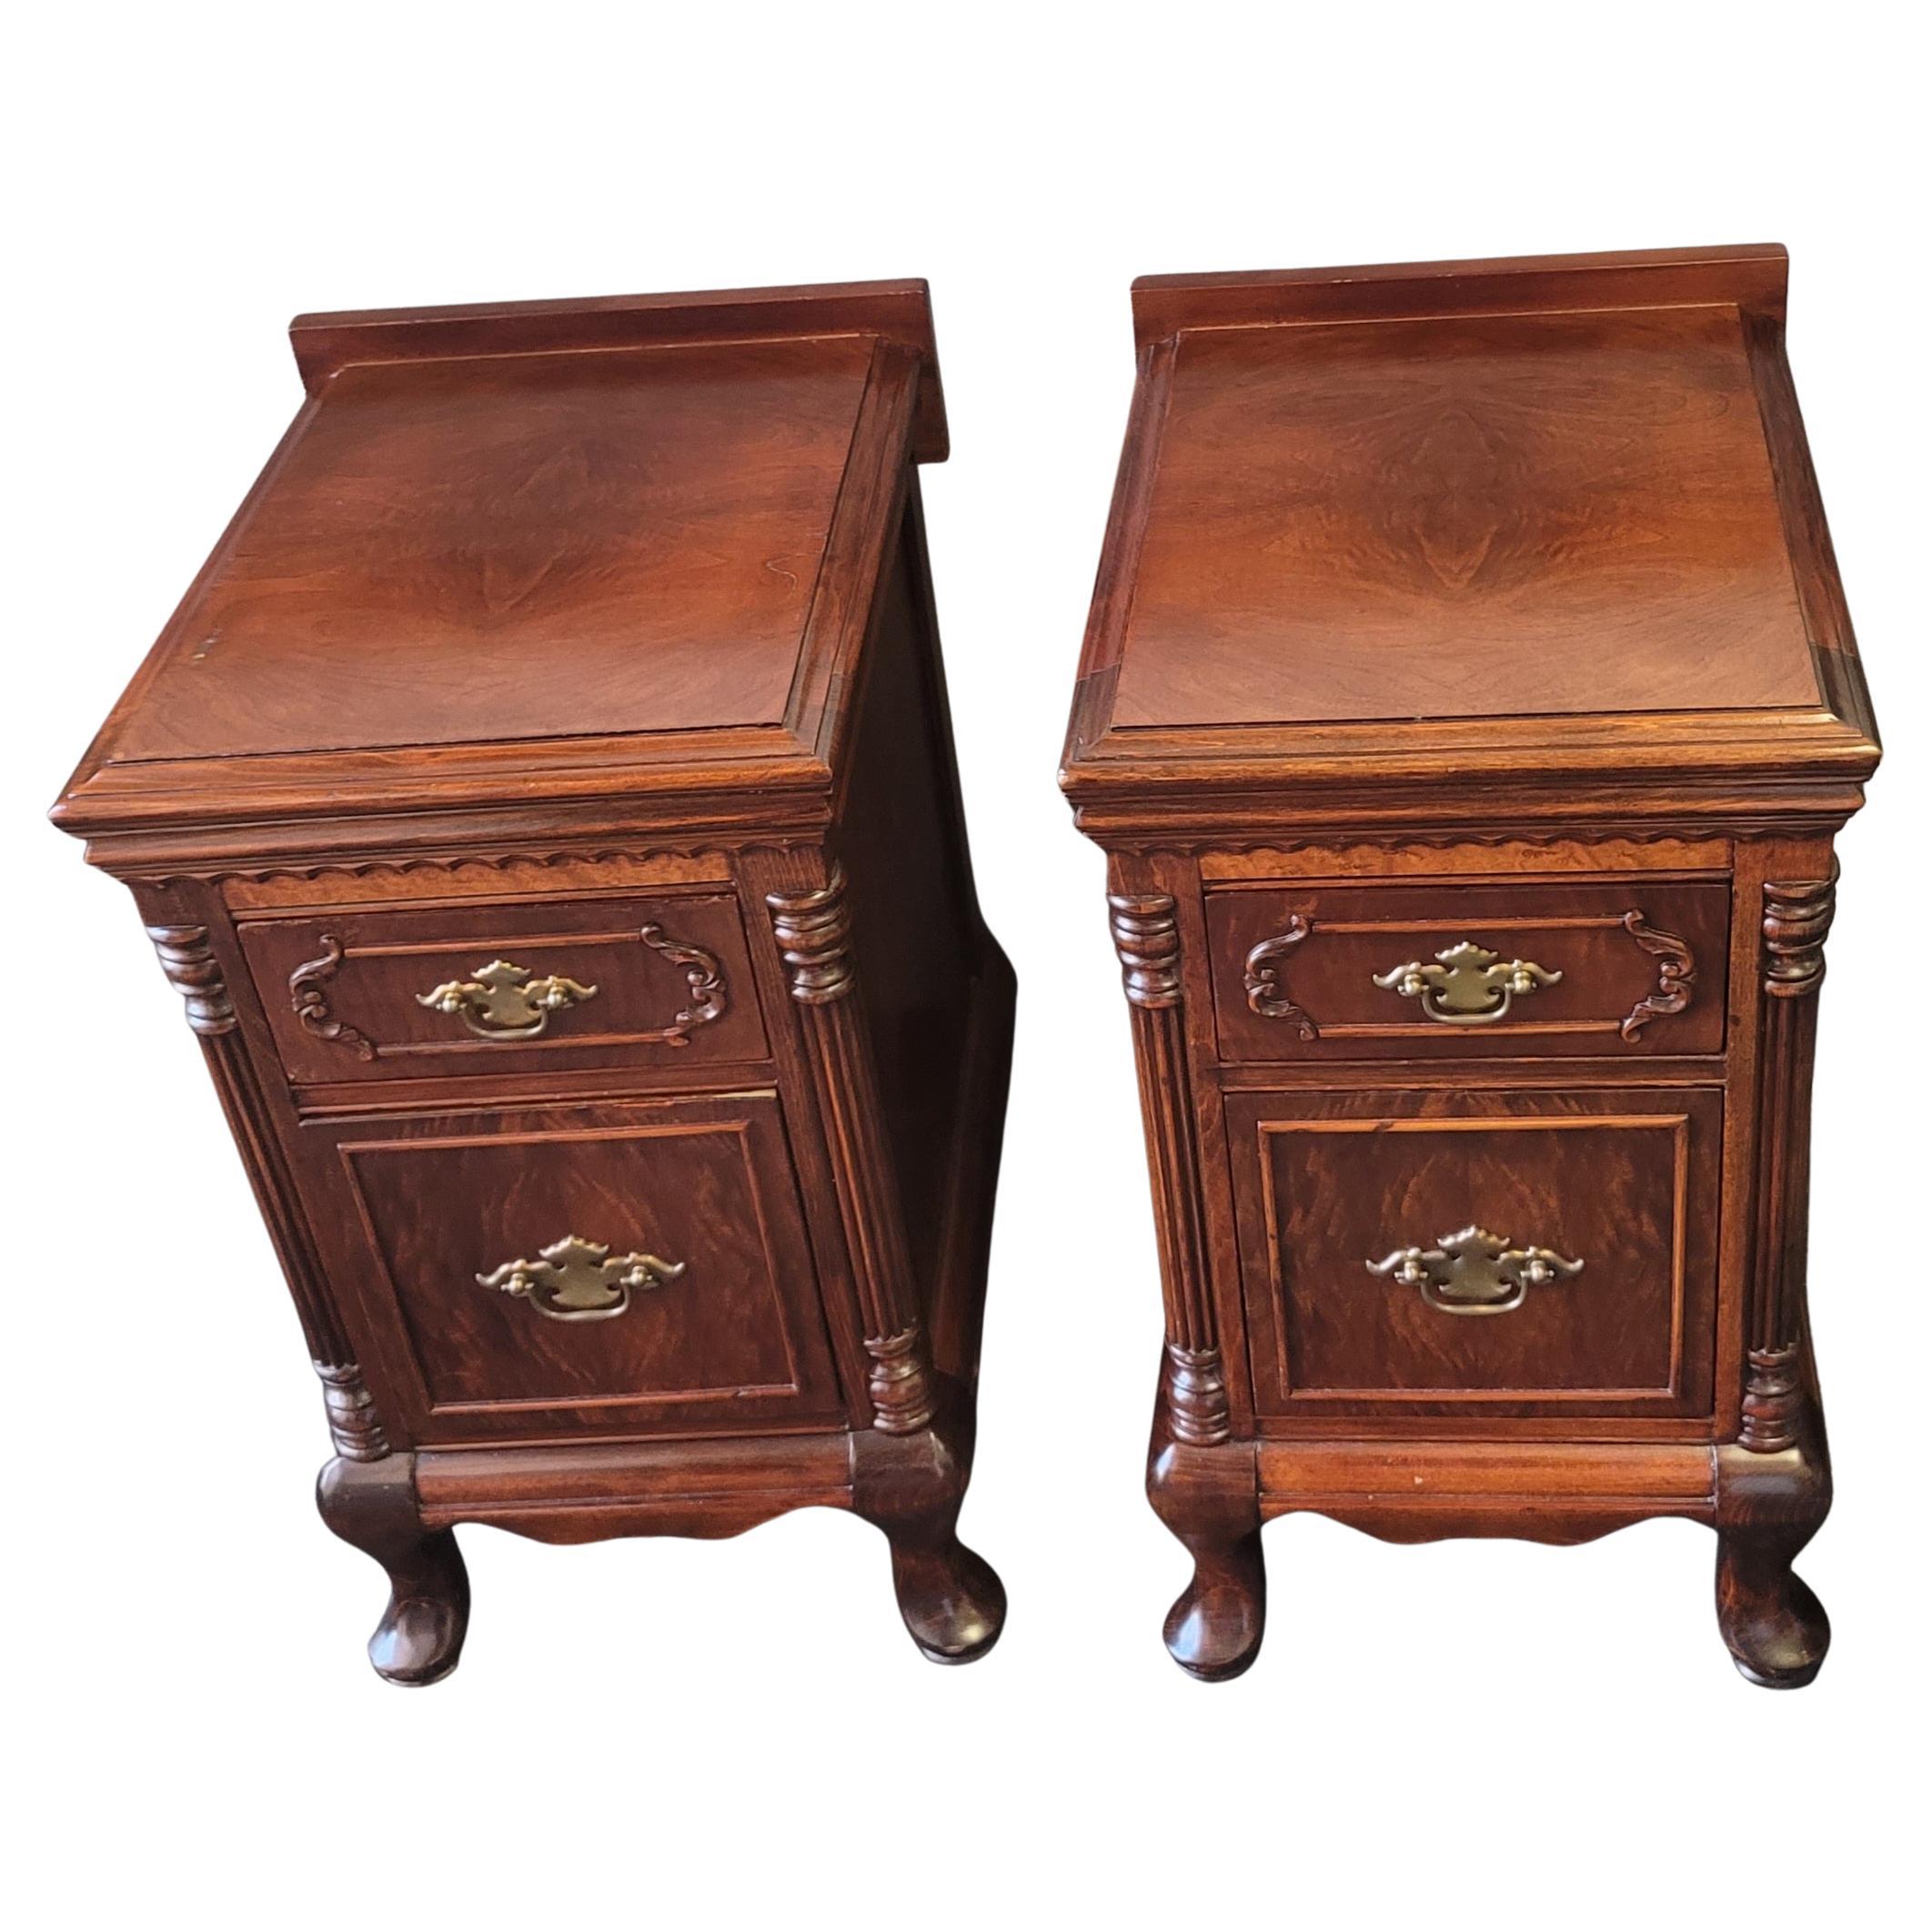 A rare , proportioned size pair of georgian style bedside chests of drawers or nightstands from the 1930s. They have been recently refinished and look great. Measure 14.25